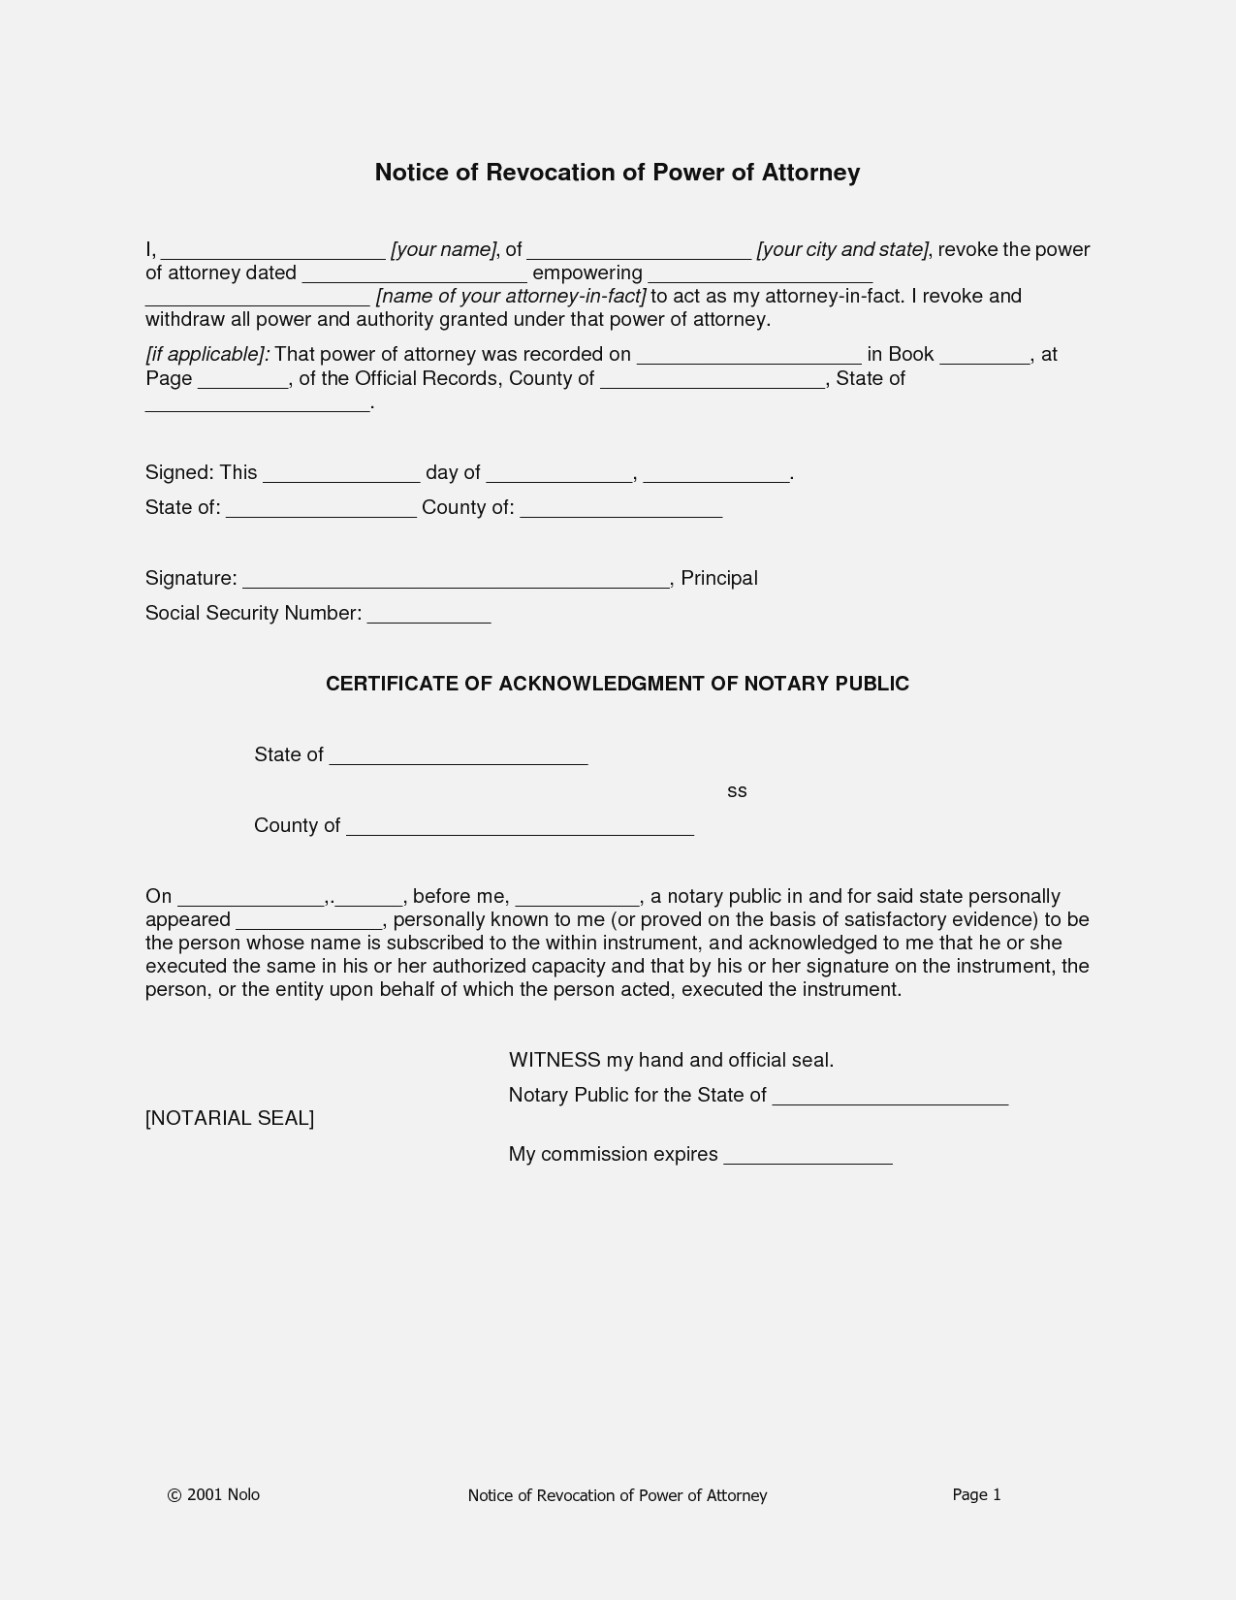 Power Of Attorney Form Free Printable Best Of Power Attorney Format - Free Printable Revocation Of Power Of Attorney Form